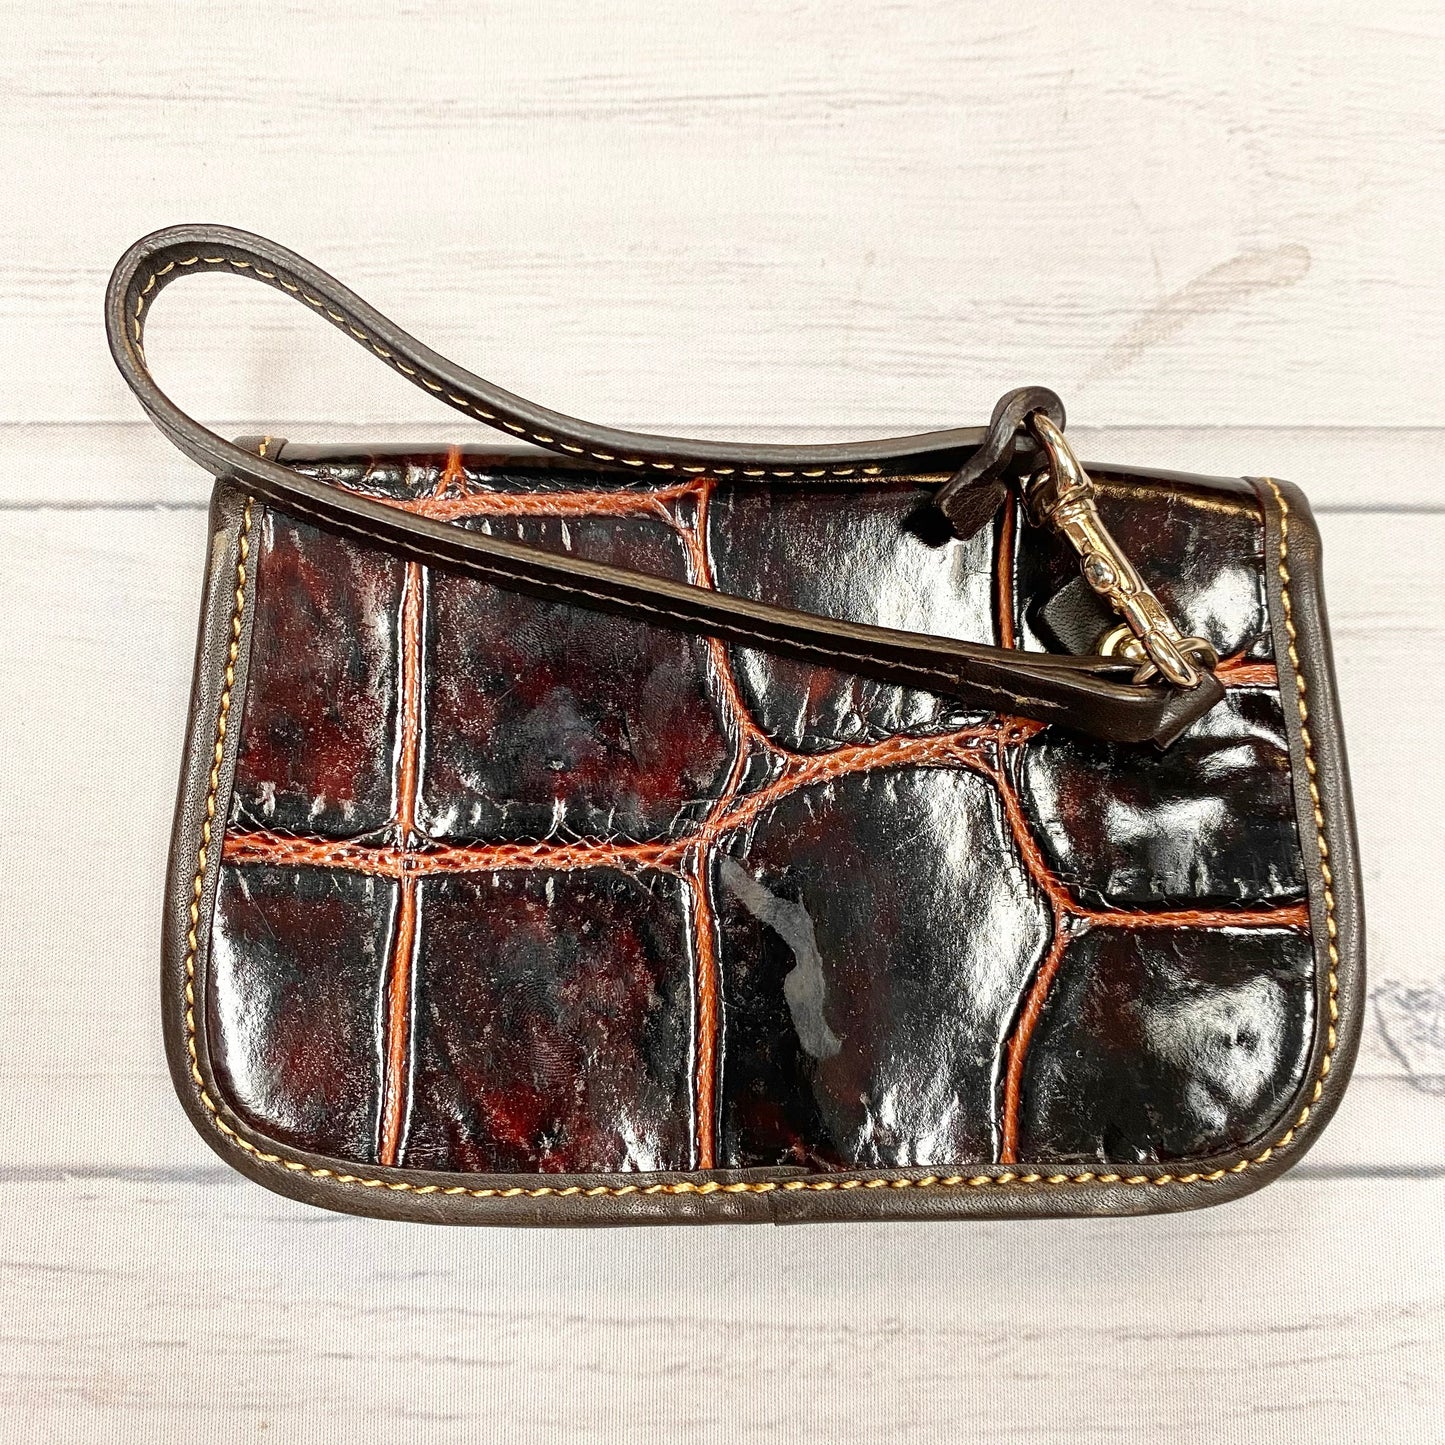 Wristlet Designer By Dooney And Bourke  Size: Small